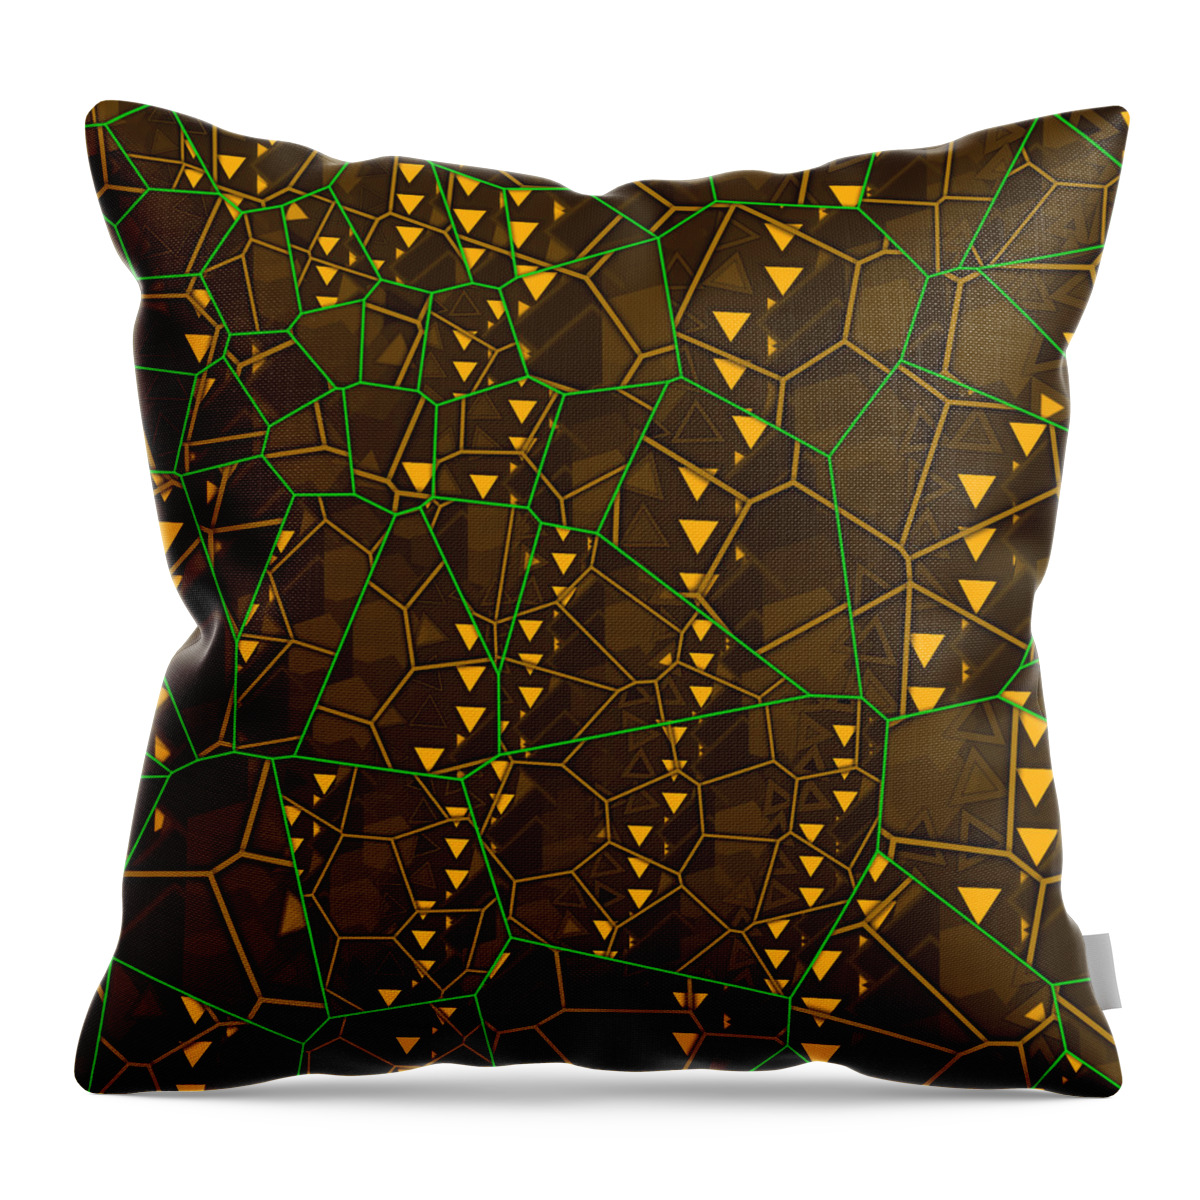 Abstract Throw Pillow featuring the digital art Pattern 11 by Marko Sabotin